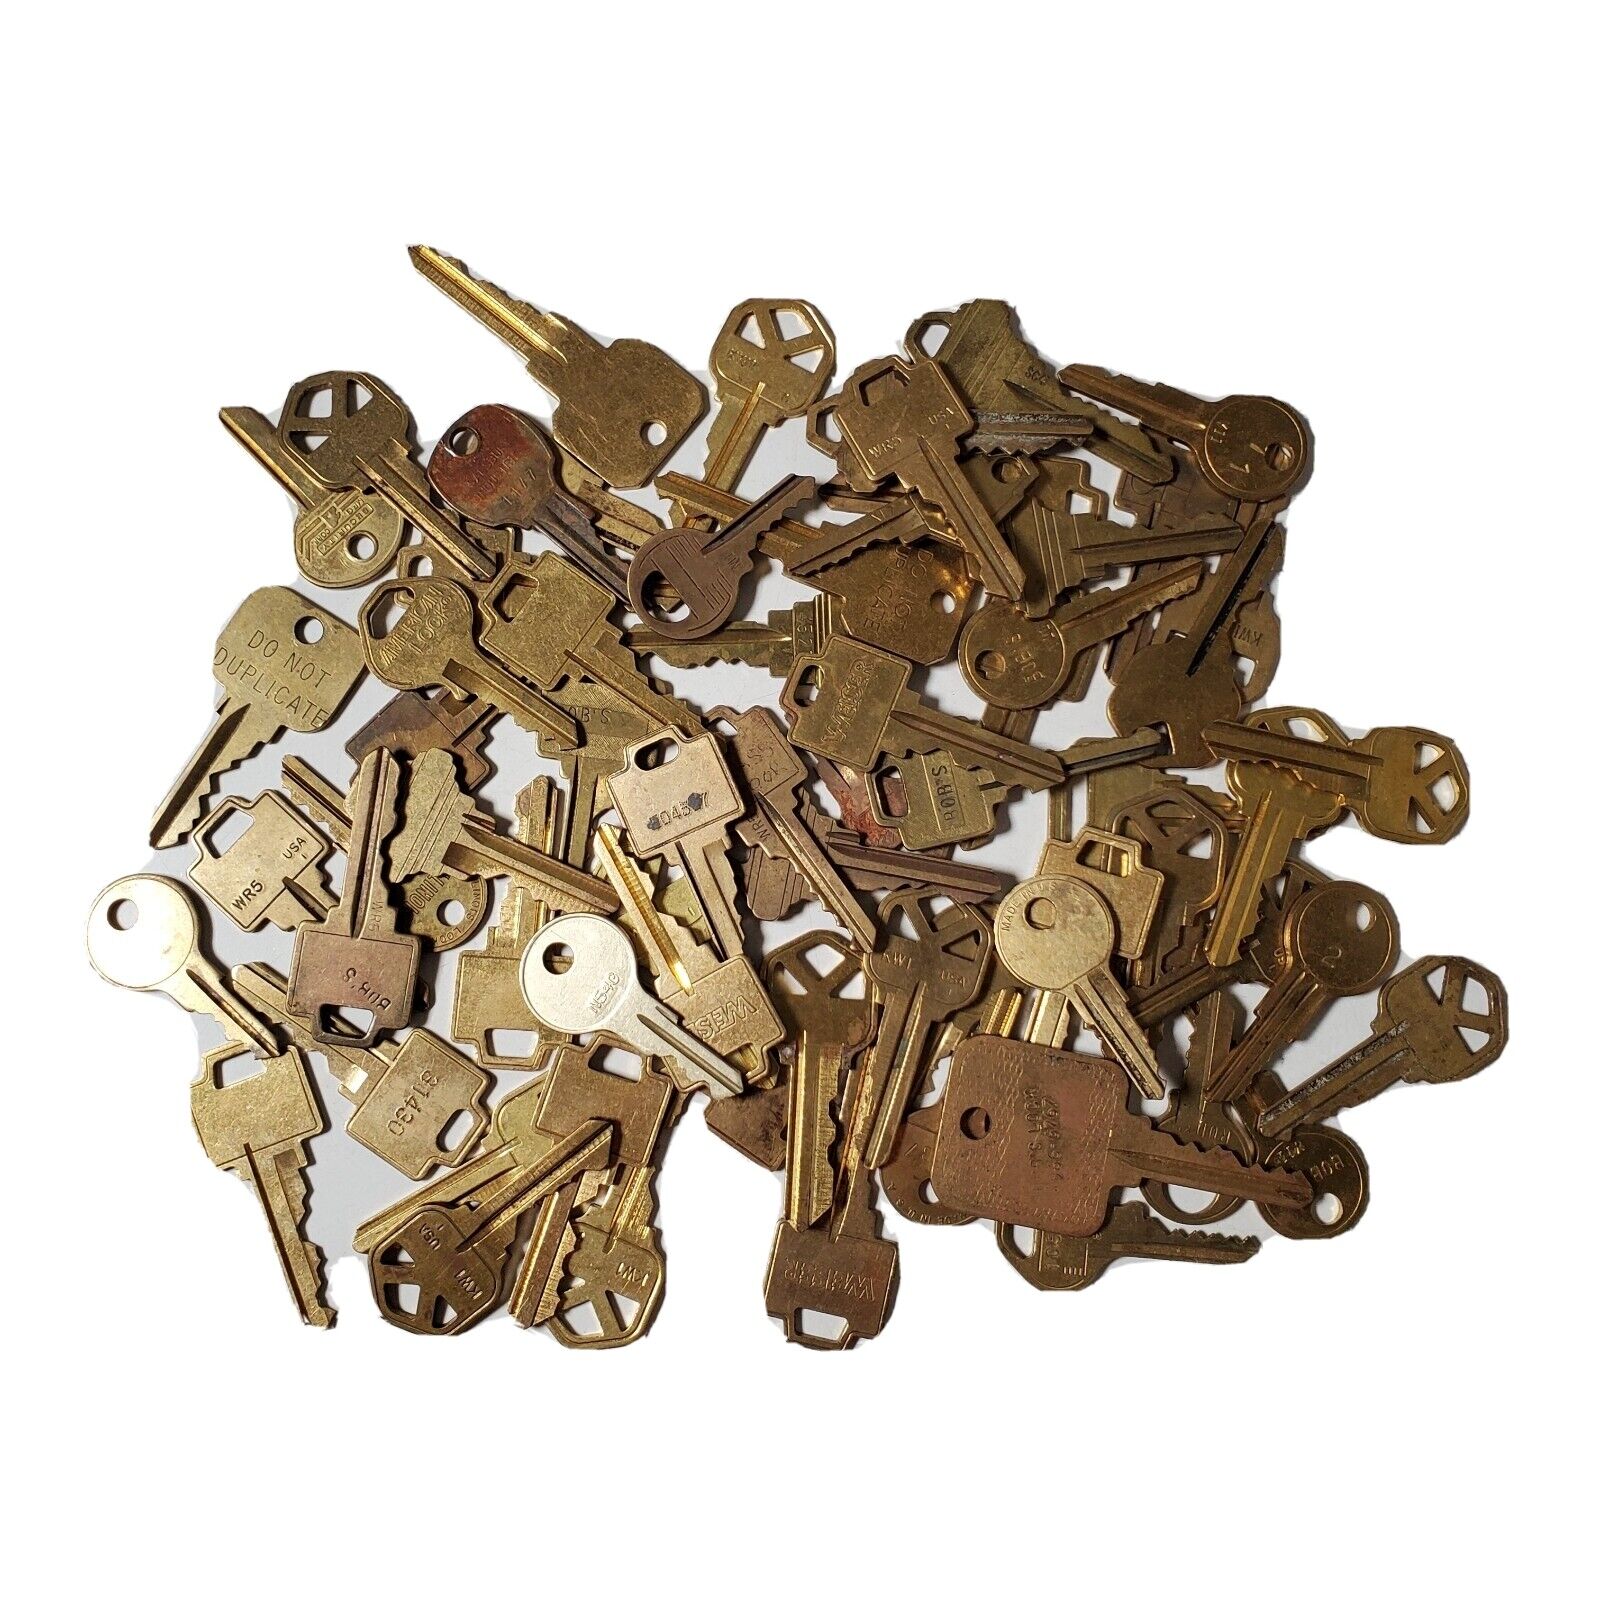 68 Old Obsolete Flat Brass Keys In A Variety Of Cuts Sizes And Makes